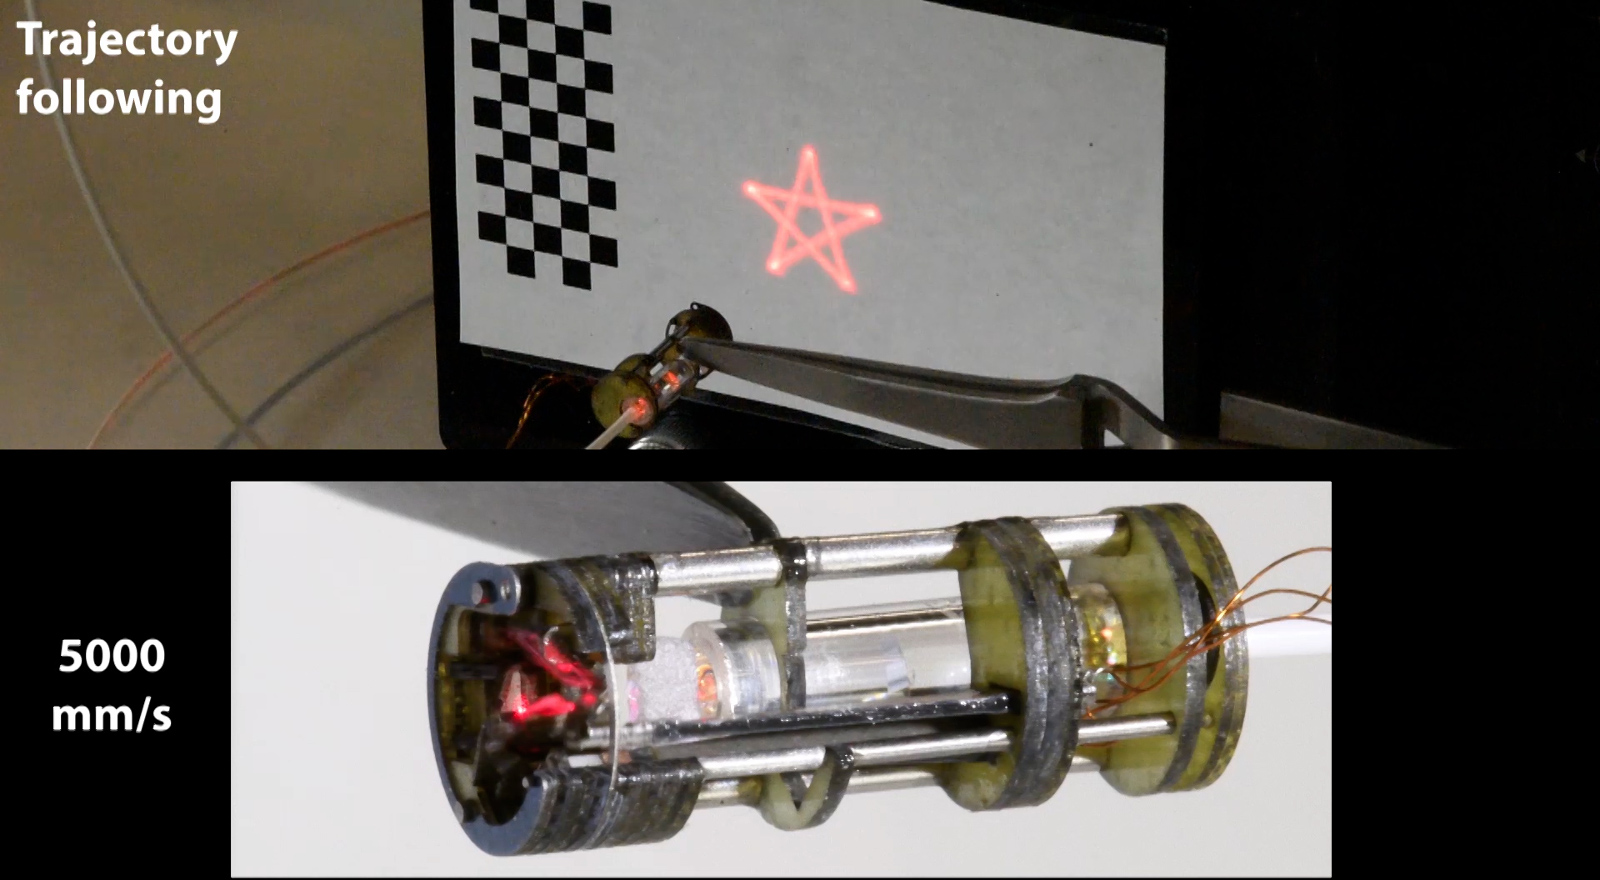 A prototype of the laser steering device creating a star trajectory